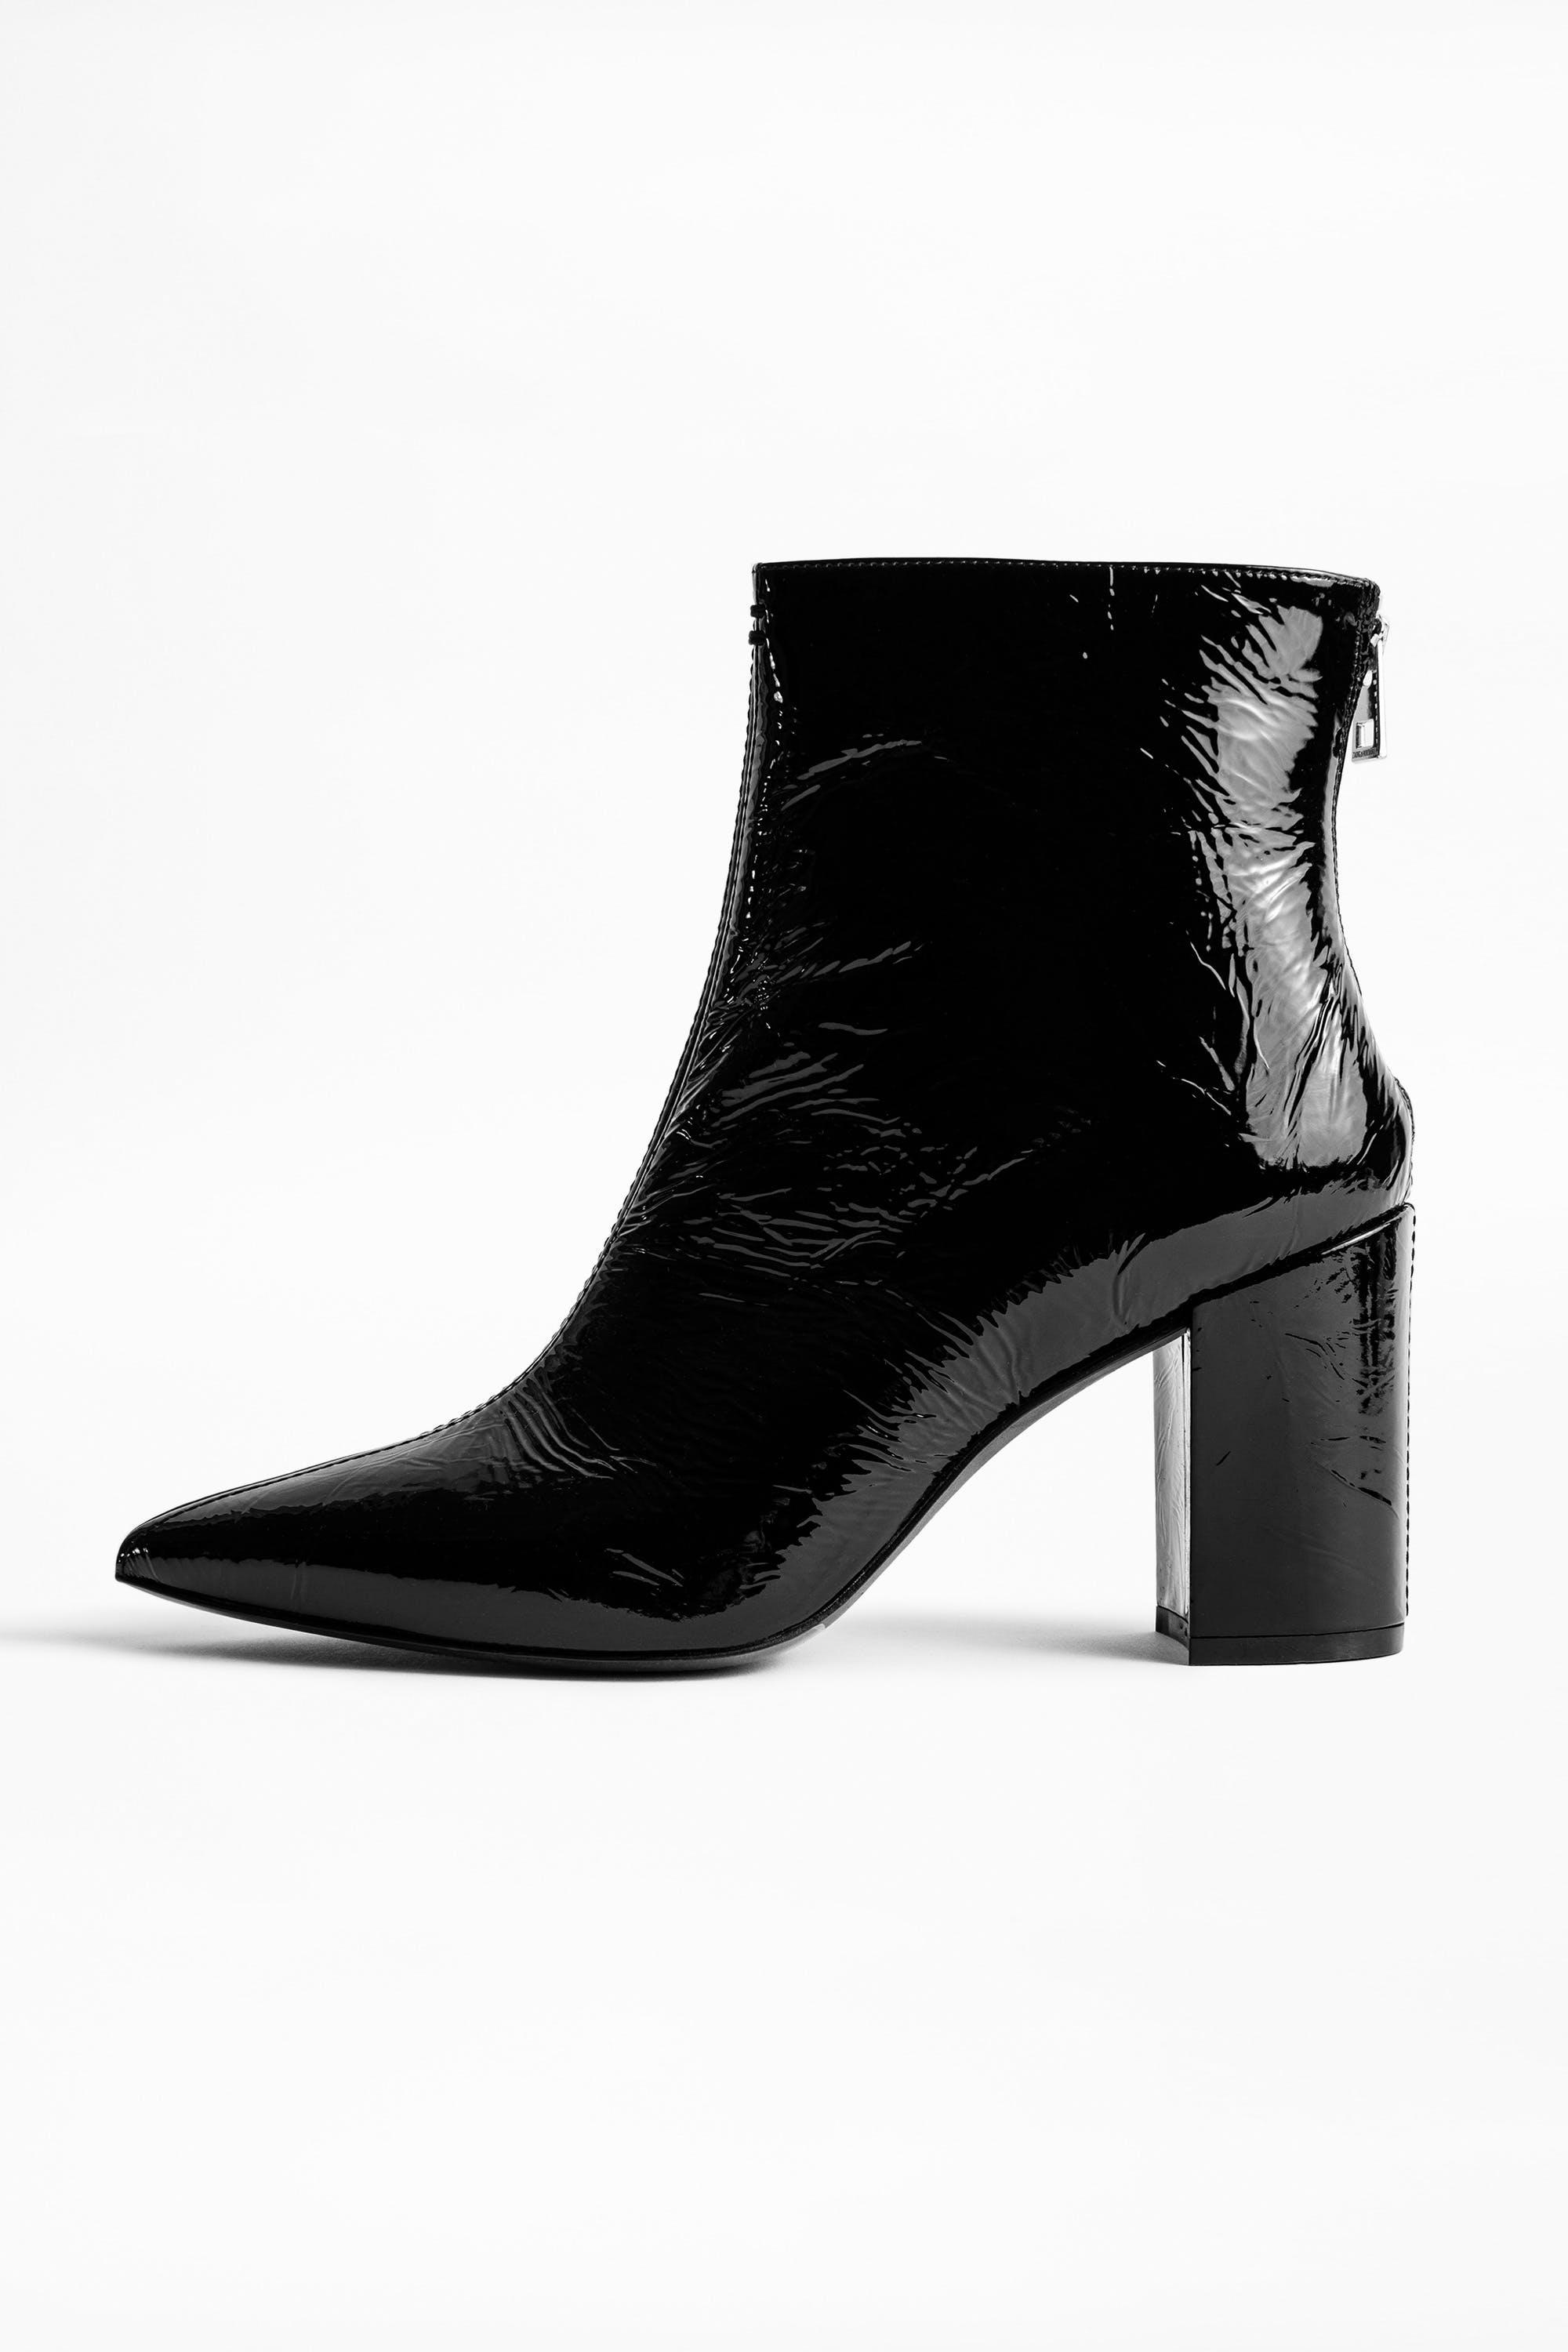 Zadig & Voltaire Leather Glimmer Vernis Ankle Boots in Black | Lyst